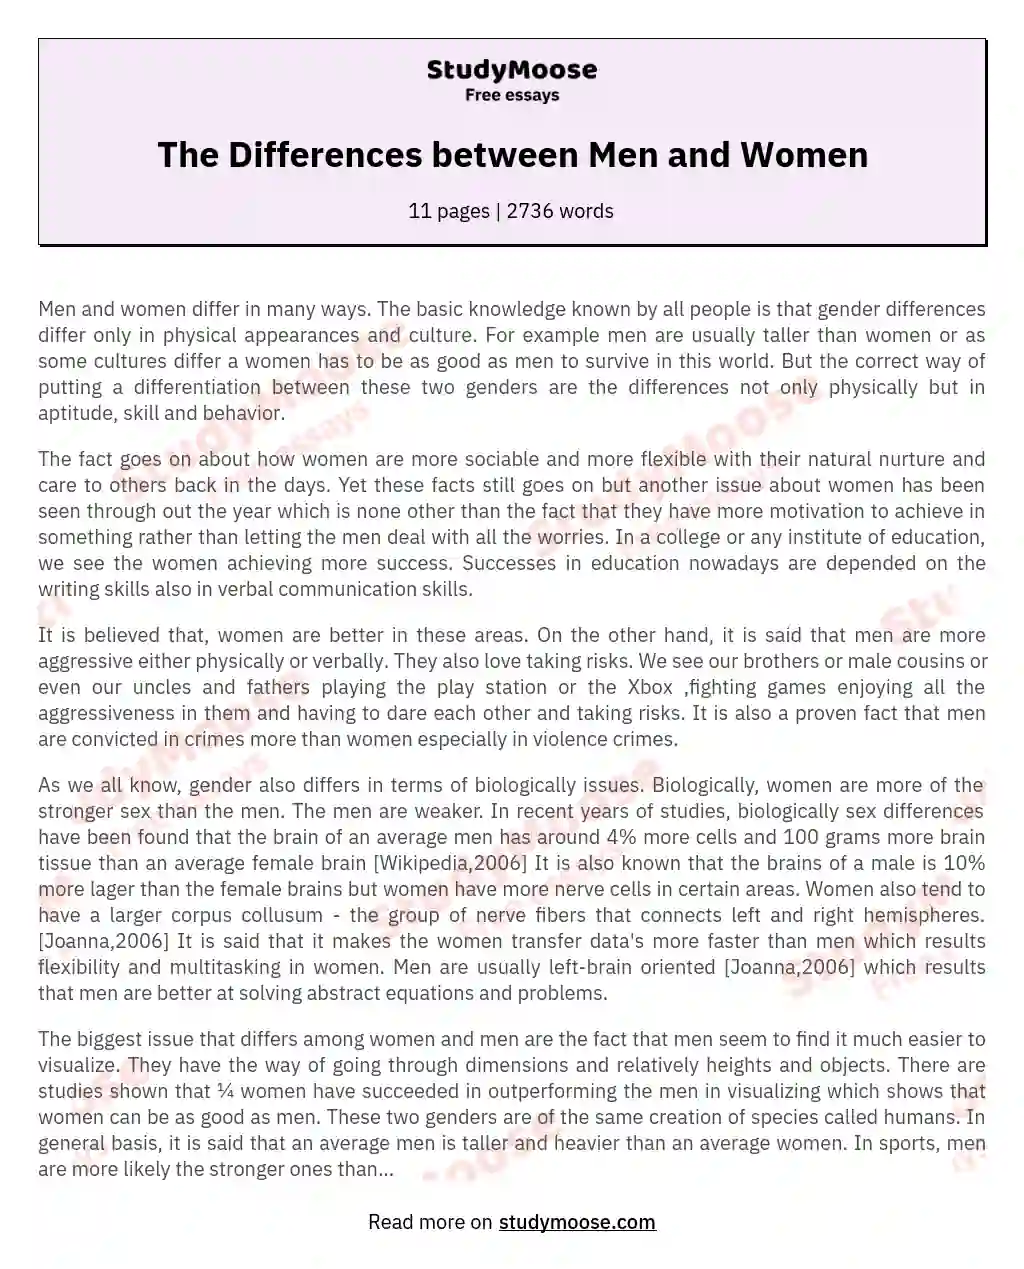 The Differences between Men and Women essay